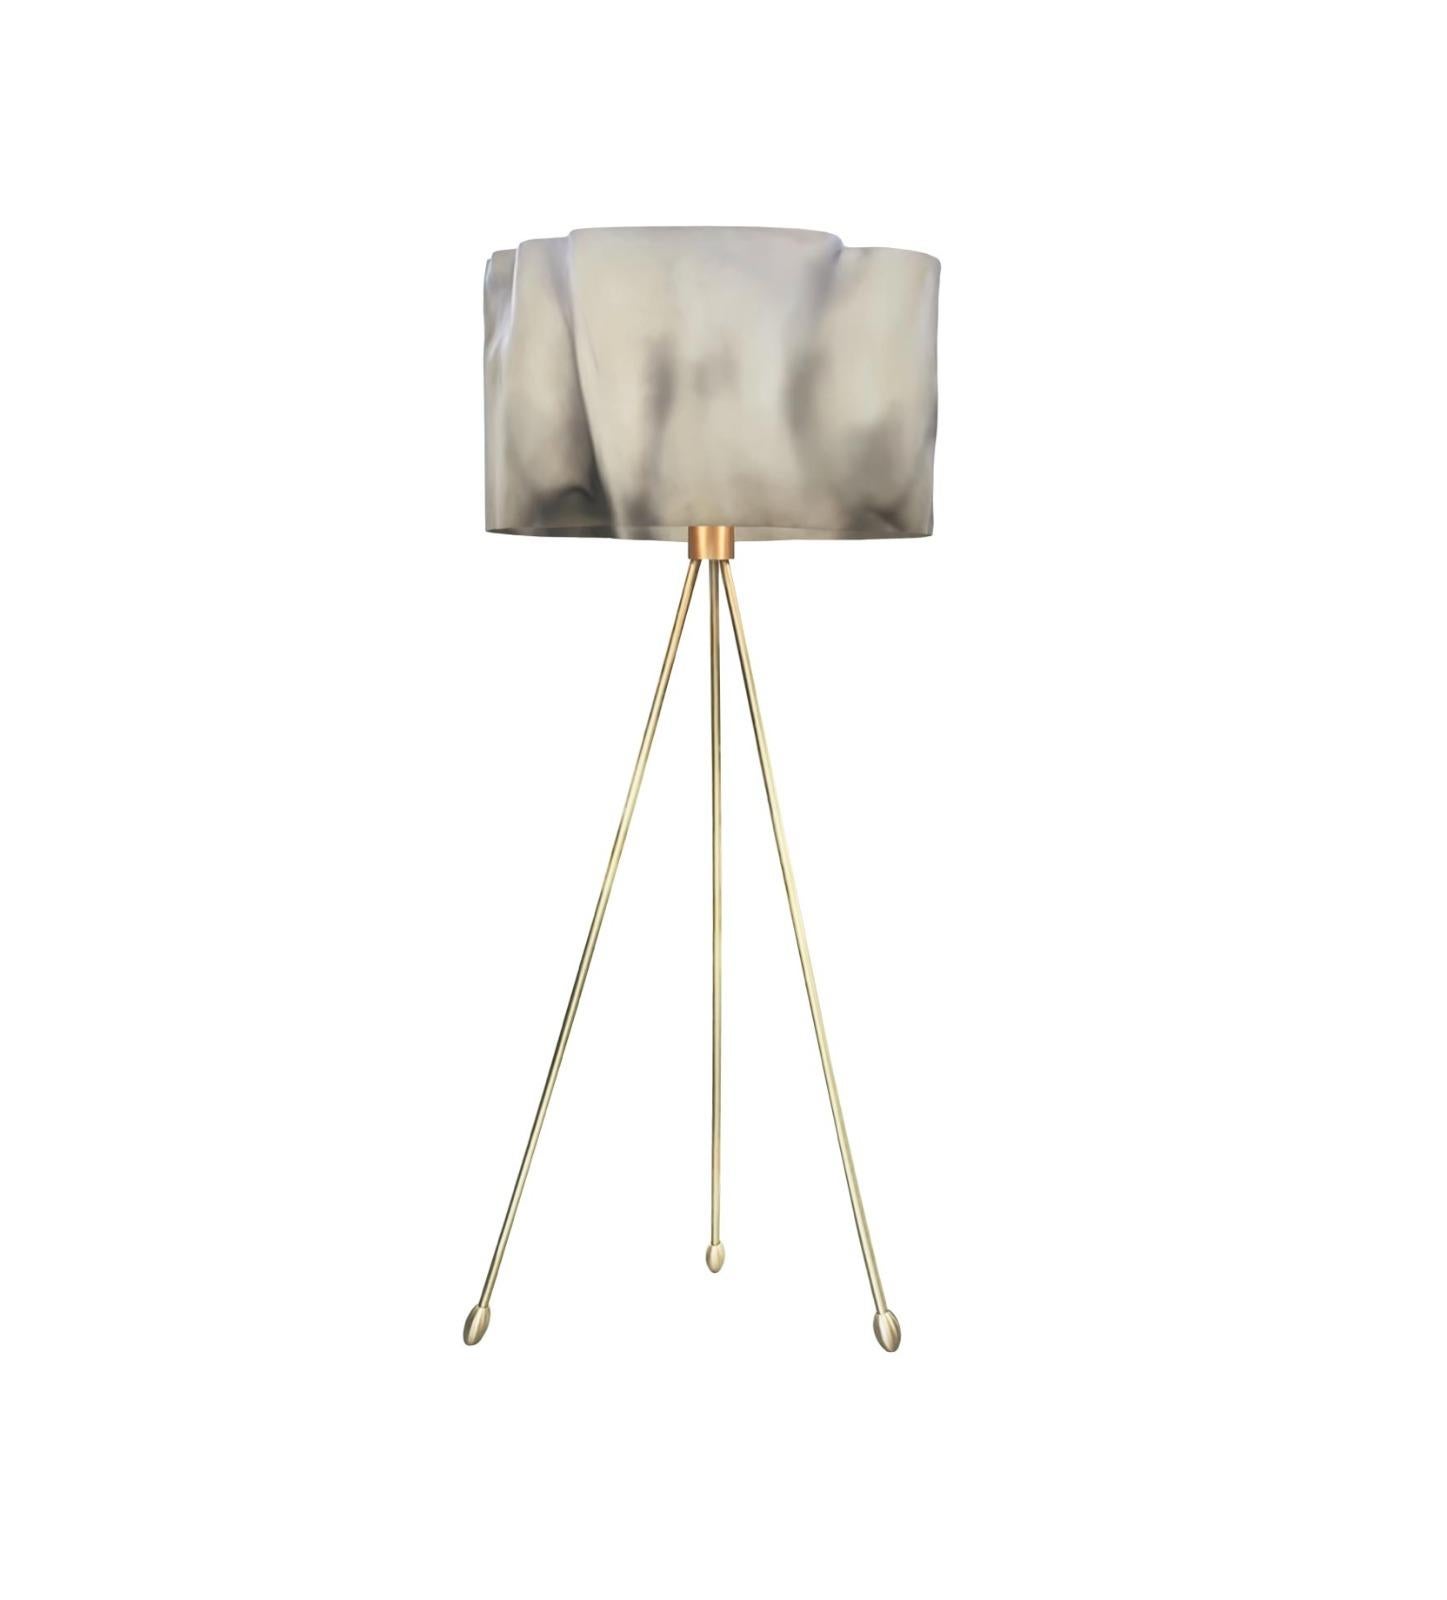 Hand-Crafted New Pair of Floor Lamp and Suspension Lamp in Resin Finished in Aged Natural For Sale